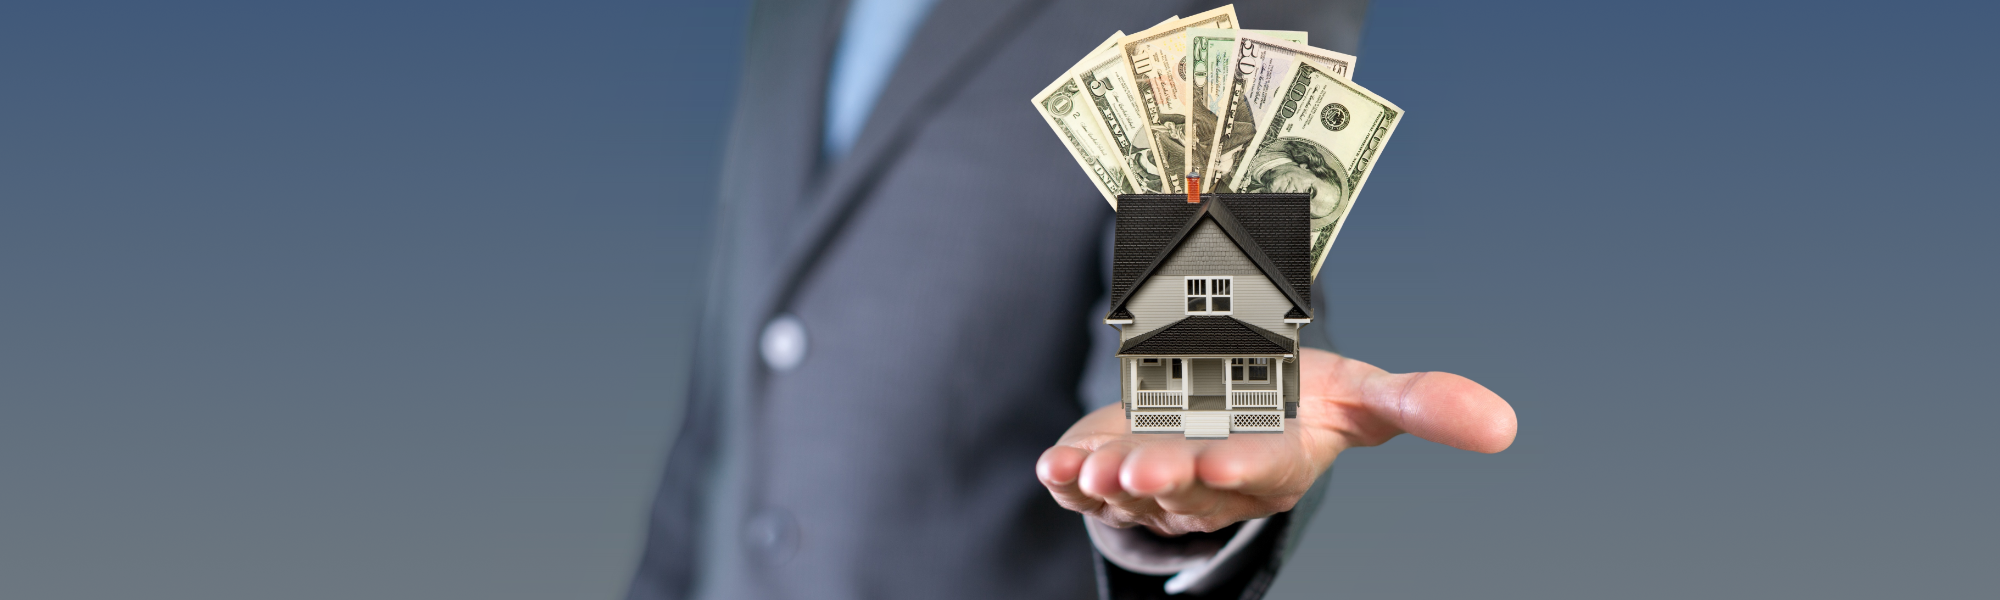 Get your cash offer with Reddtrow and sell your house fast!